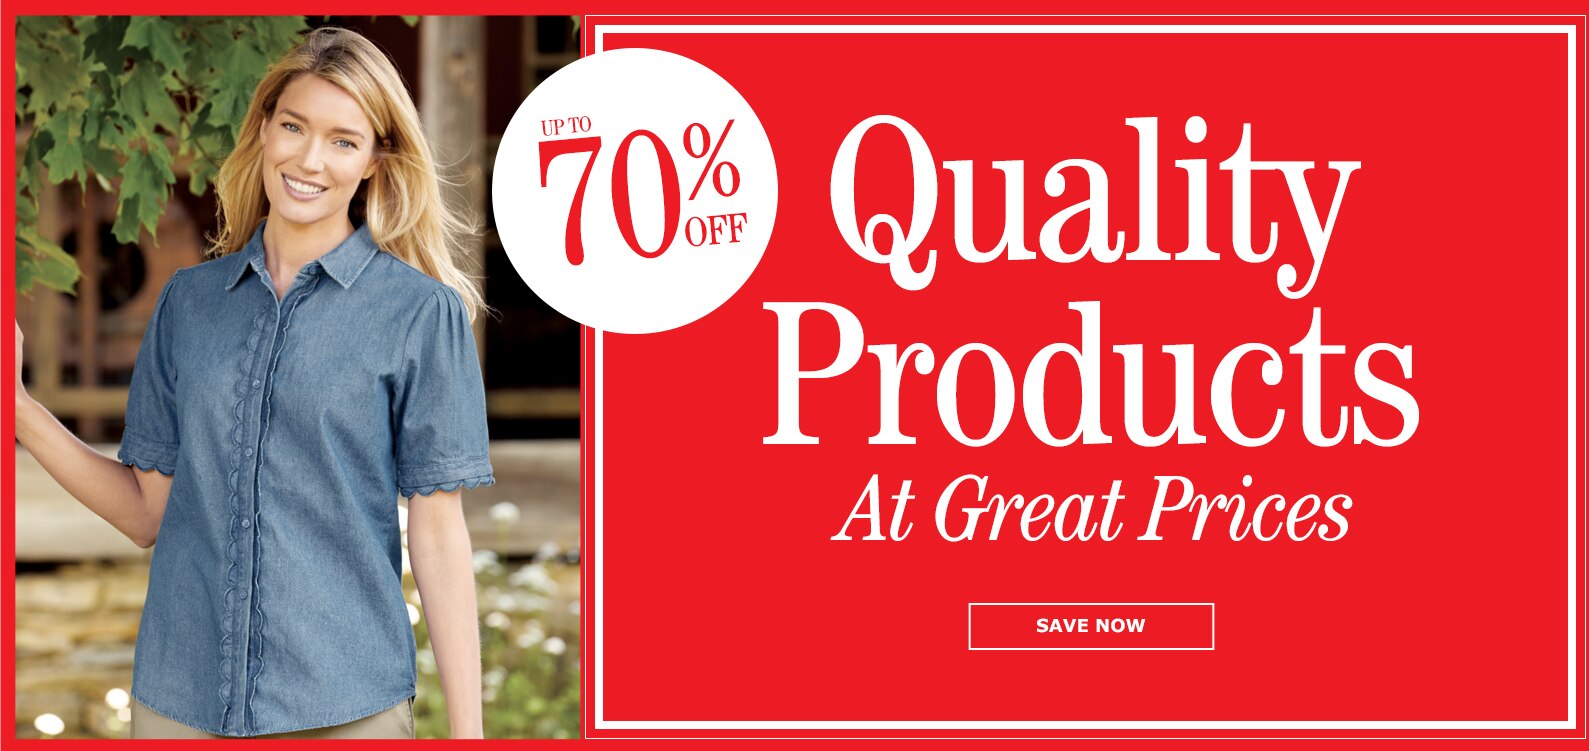 Quality Products. At Great Prices. Up to 70% off!